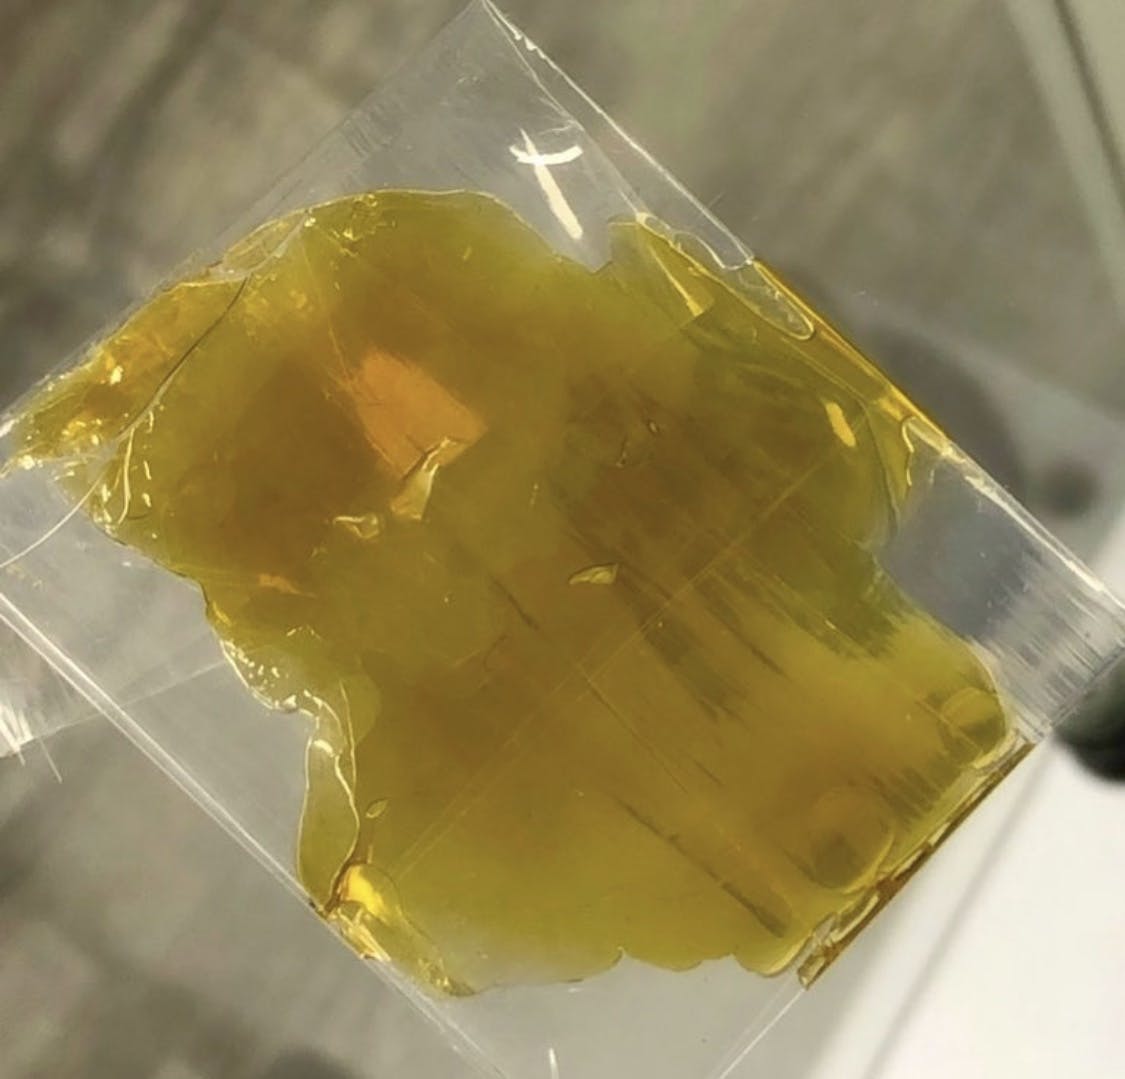 concentrate-gsc-shatter-sold-out